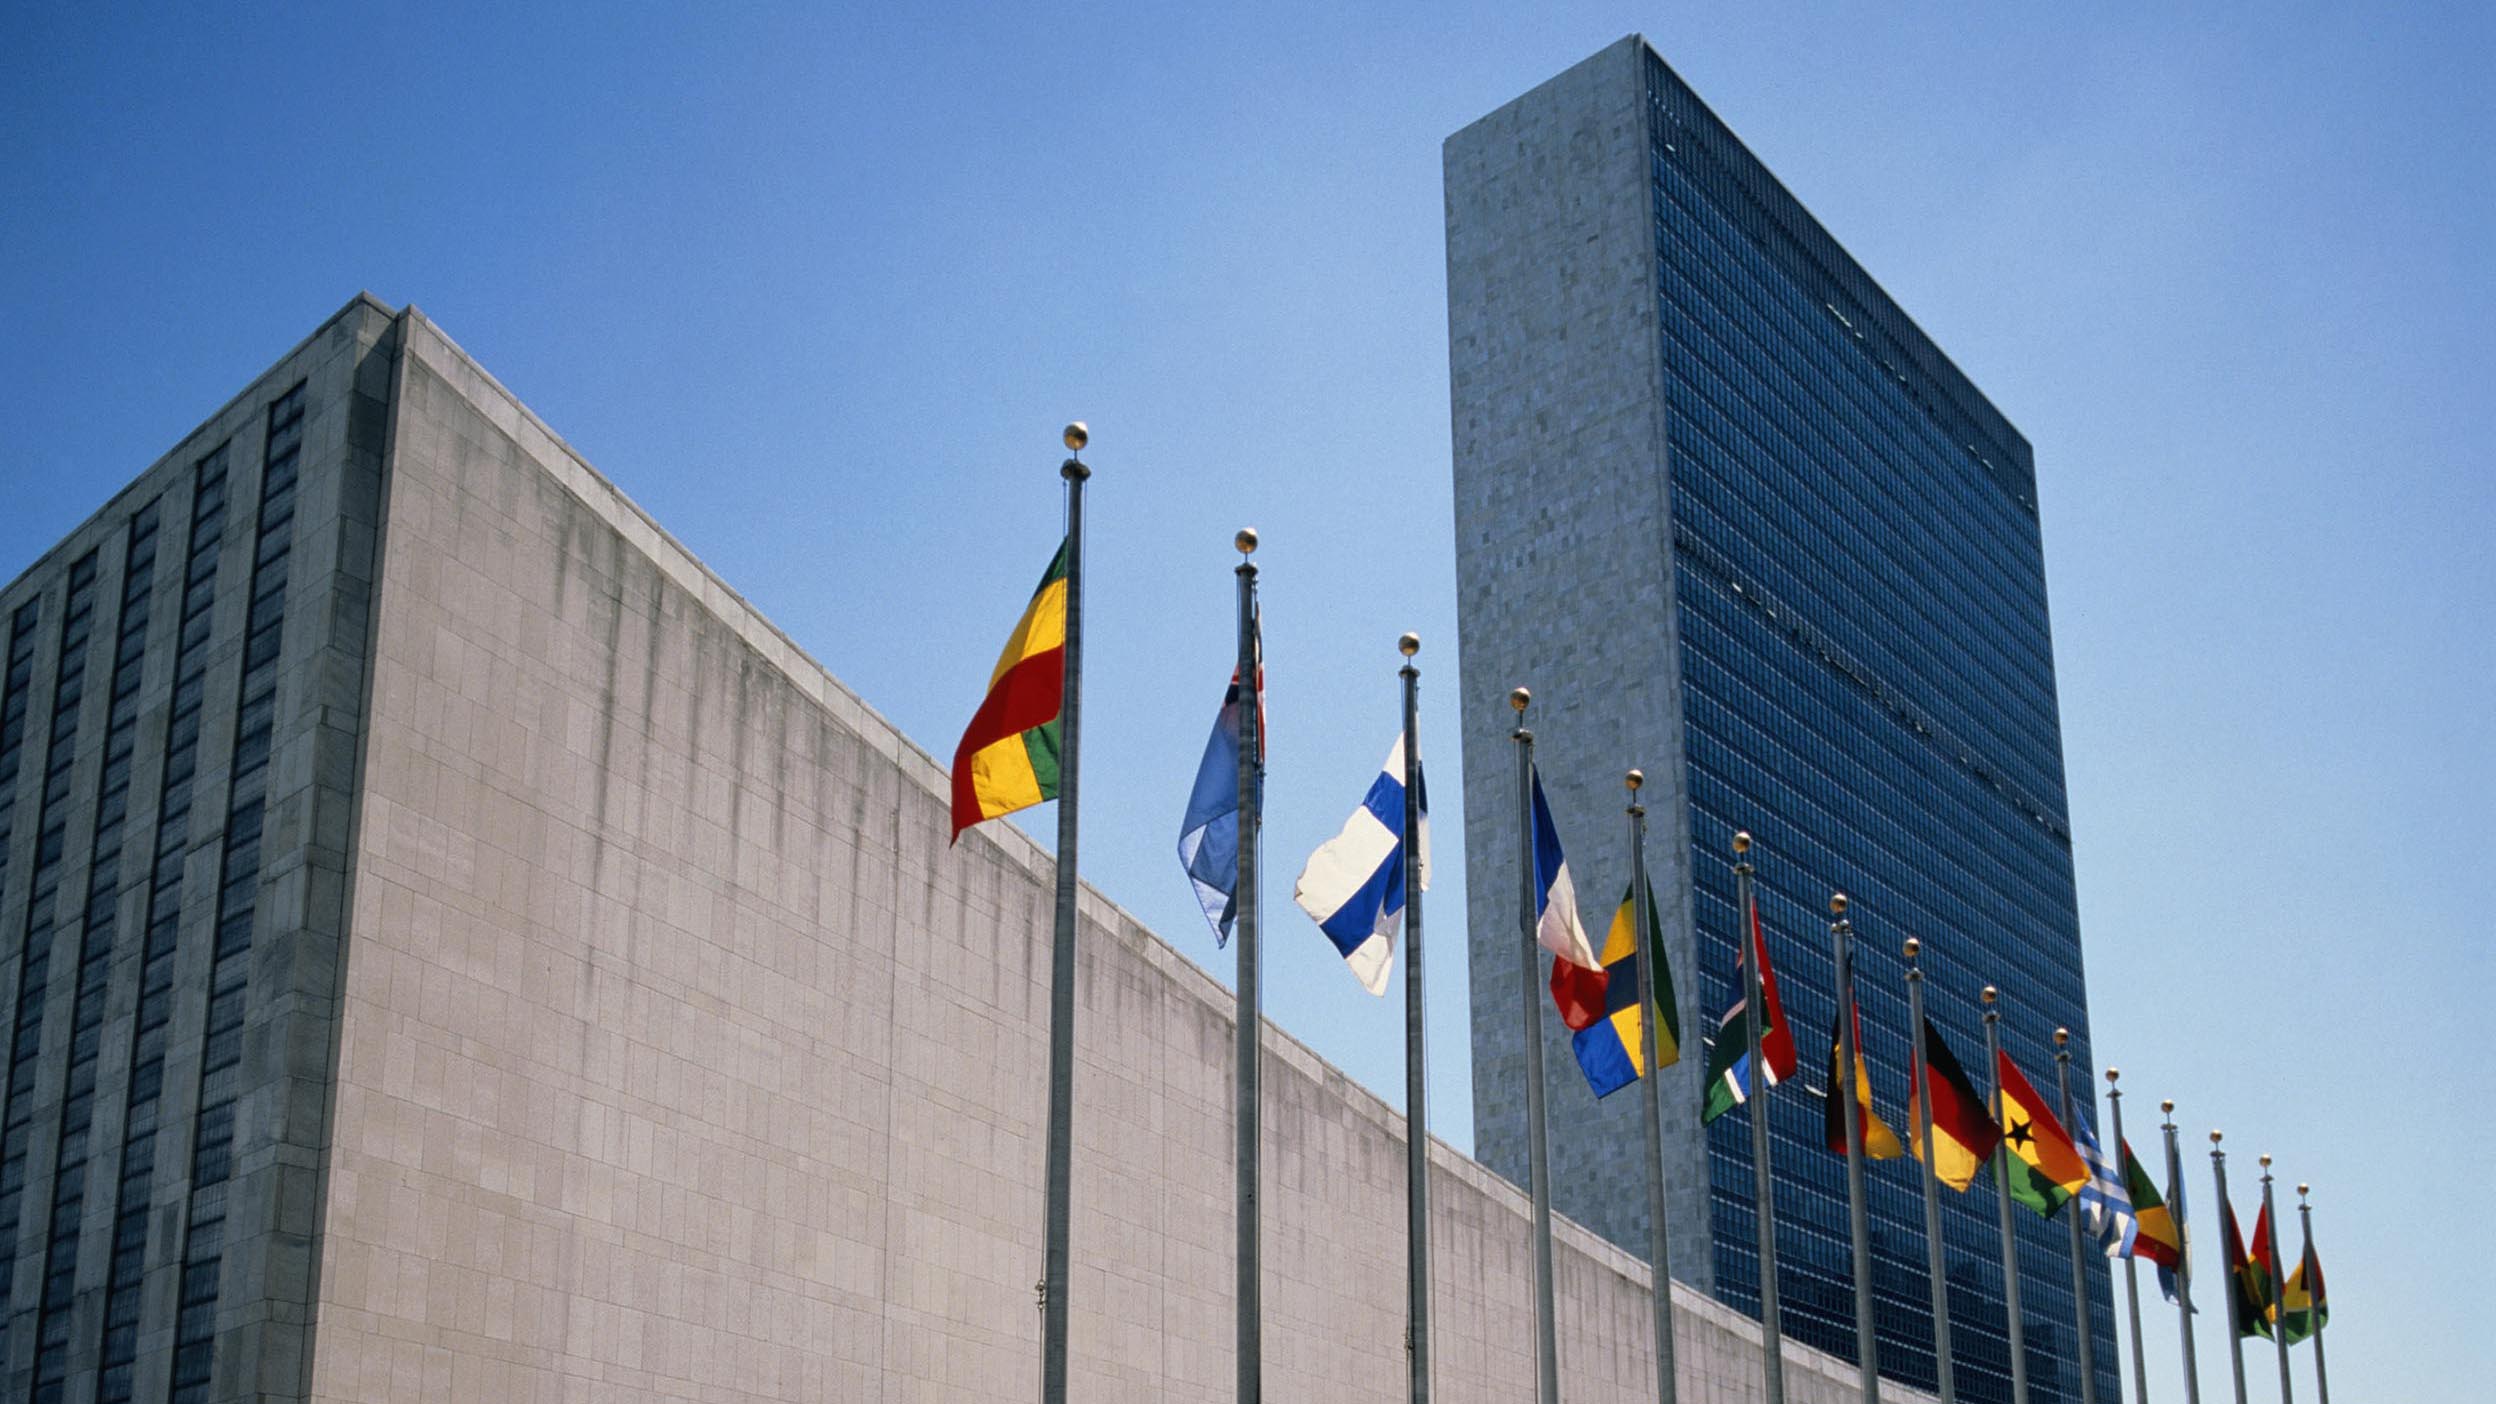 Flags fly in front of the United Nations building.